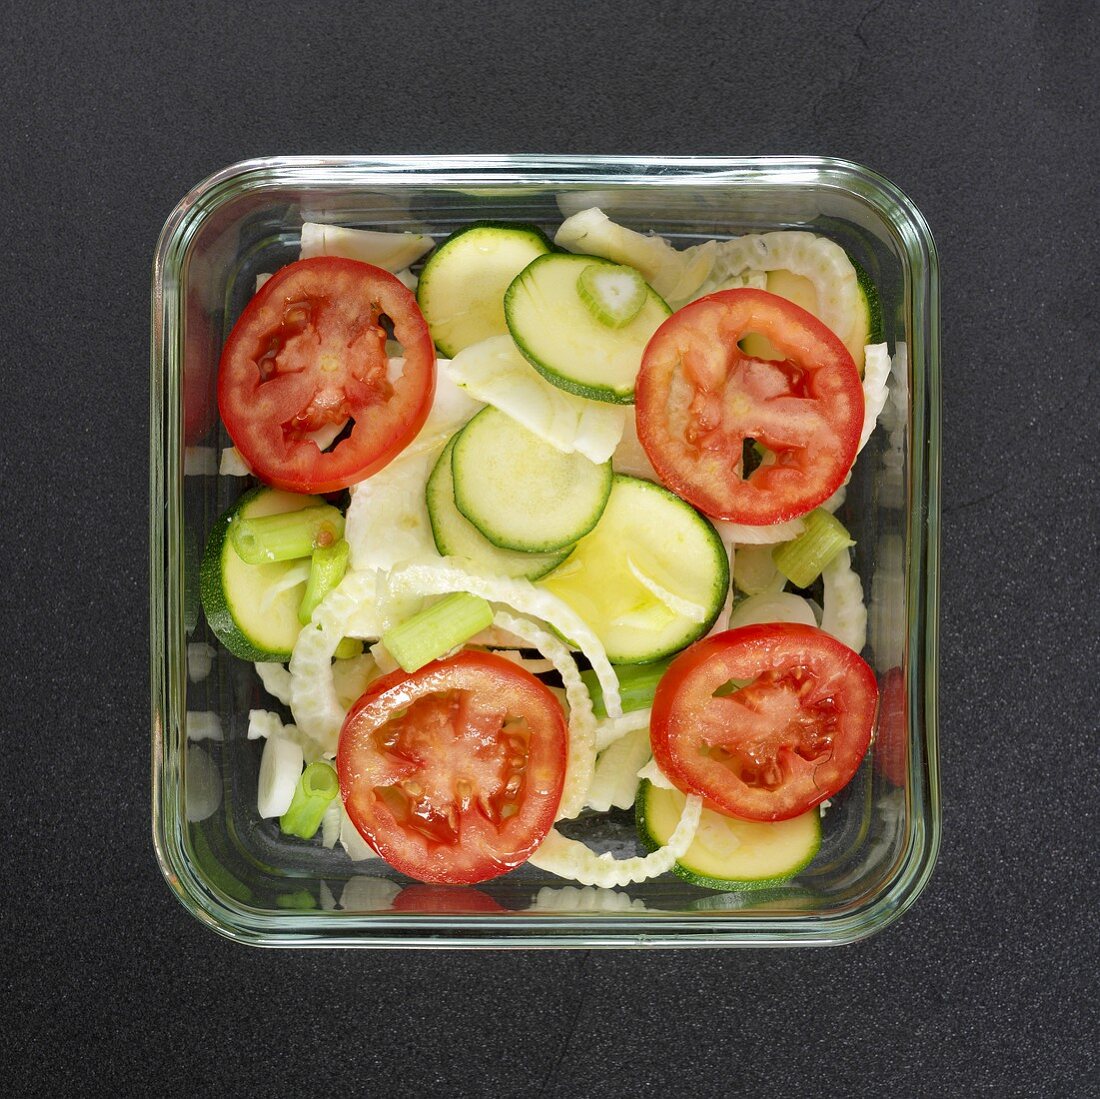 Sliced vegetables in glass dish (overhead view)